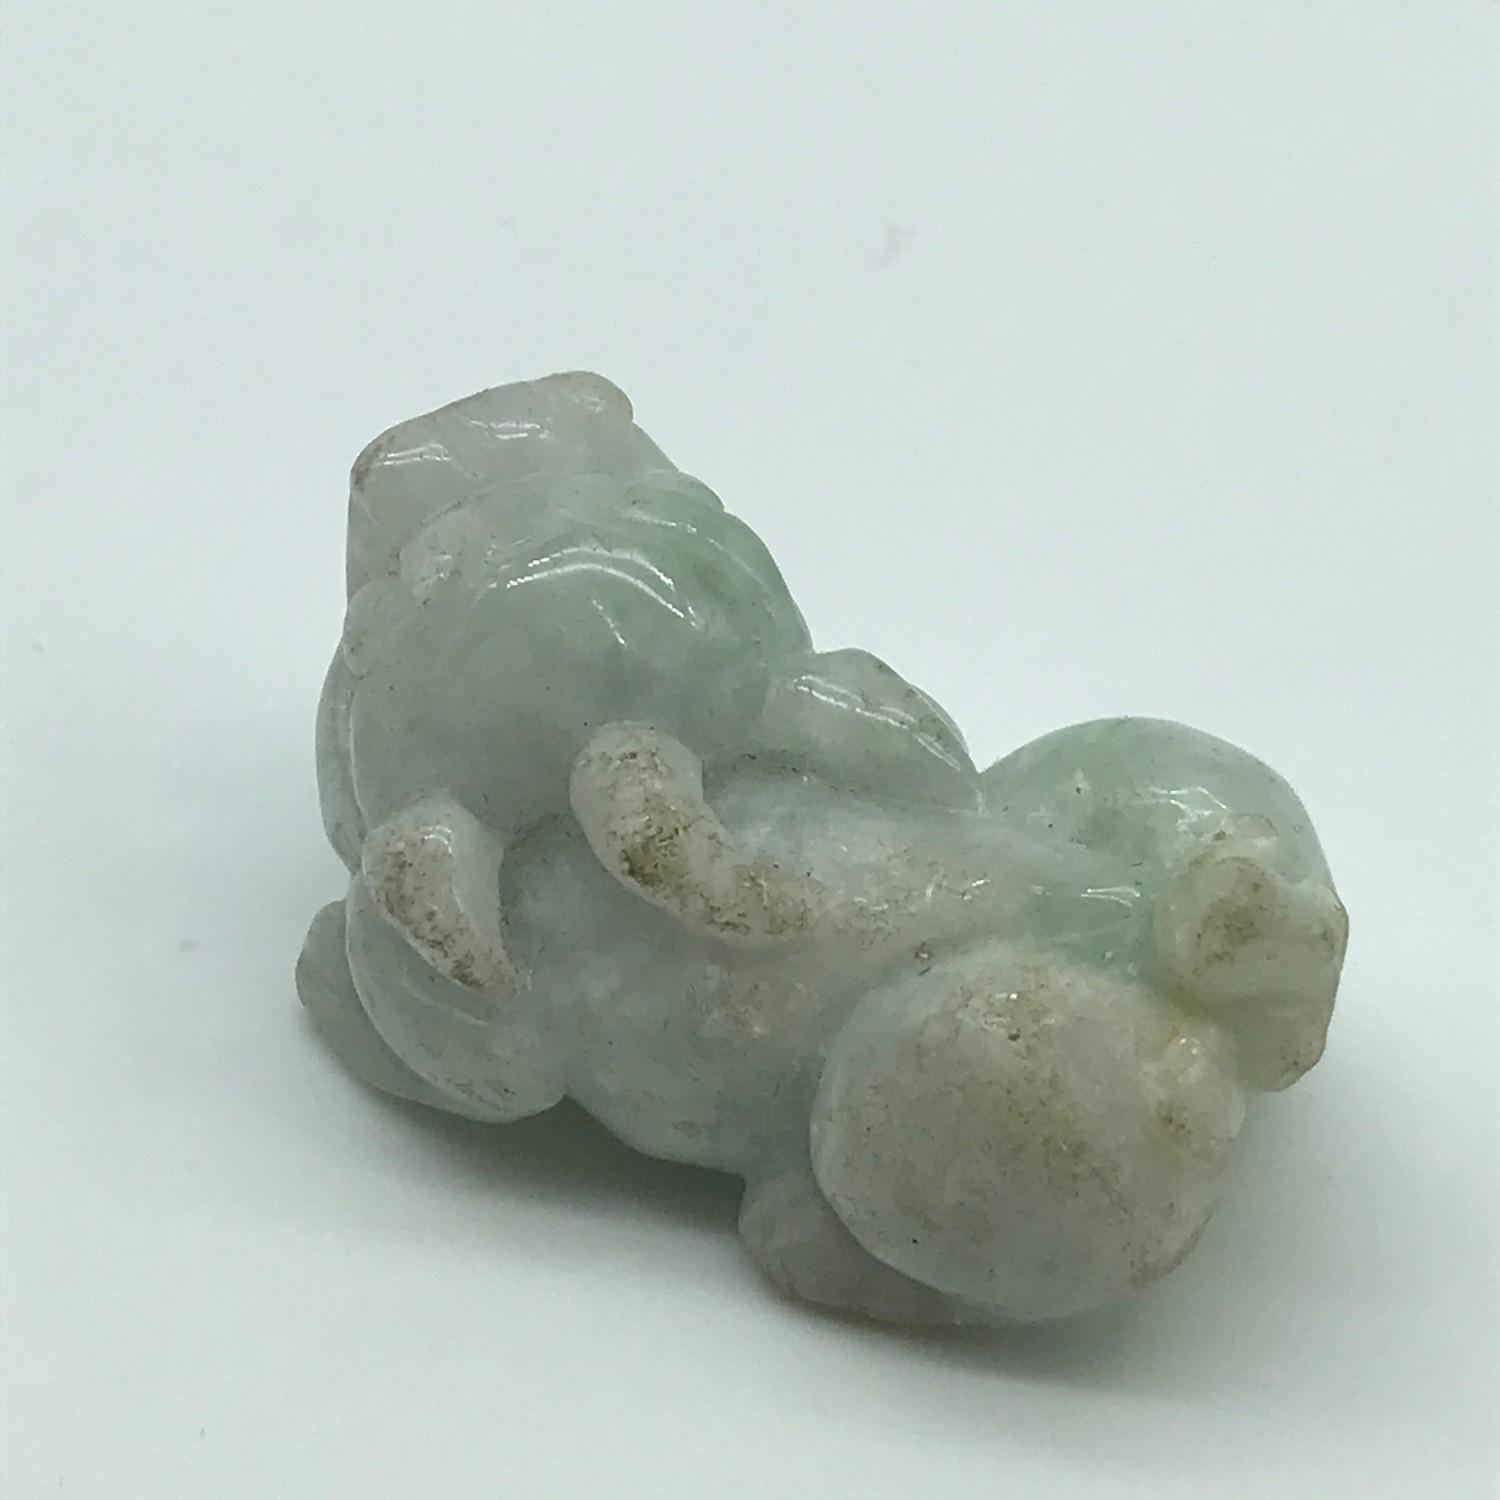 Antique Chinese hand carved jade foo dog sculpture [Measures 3.3 cm in length] - Image 2 of 4